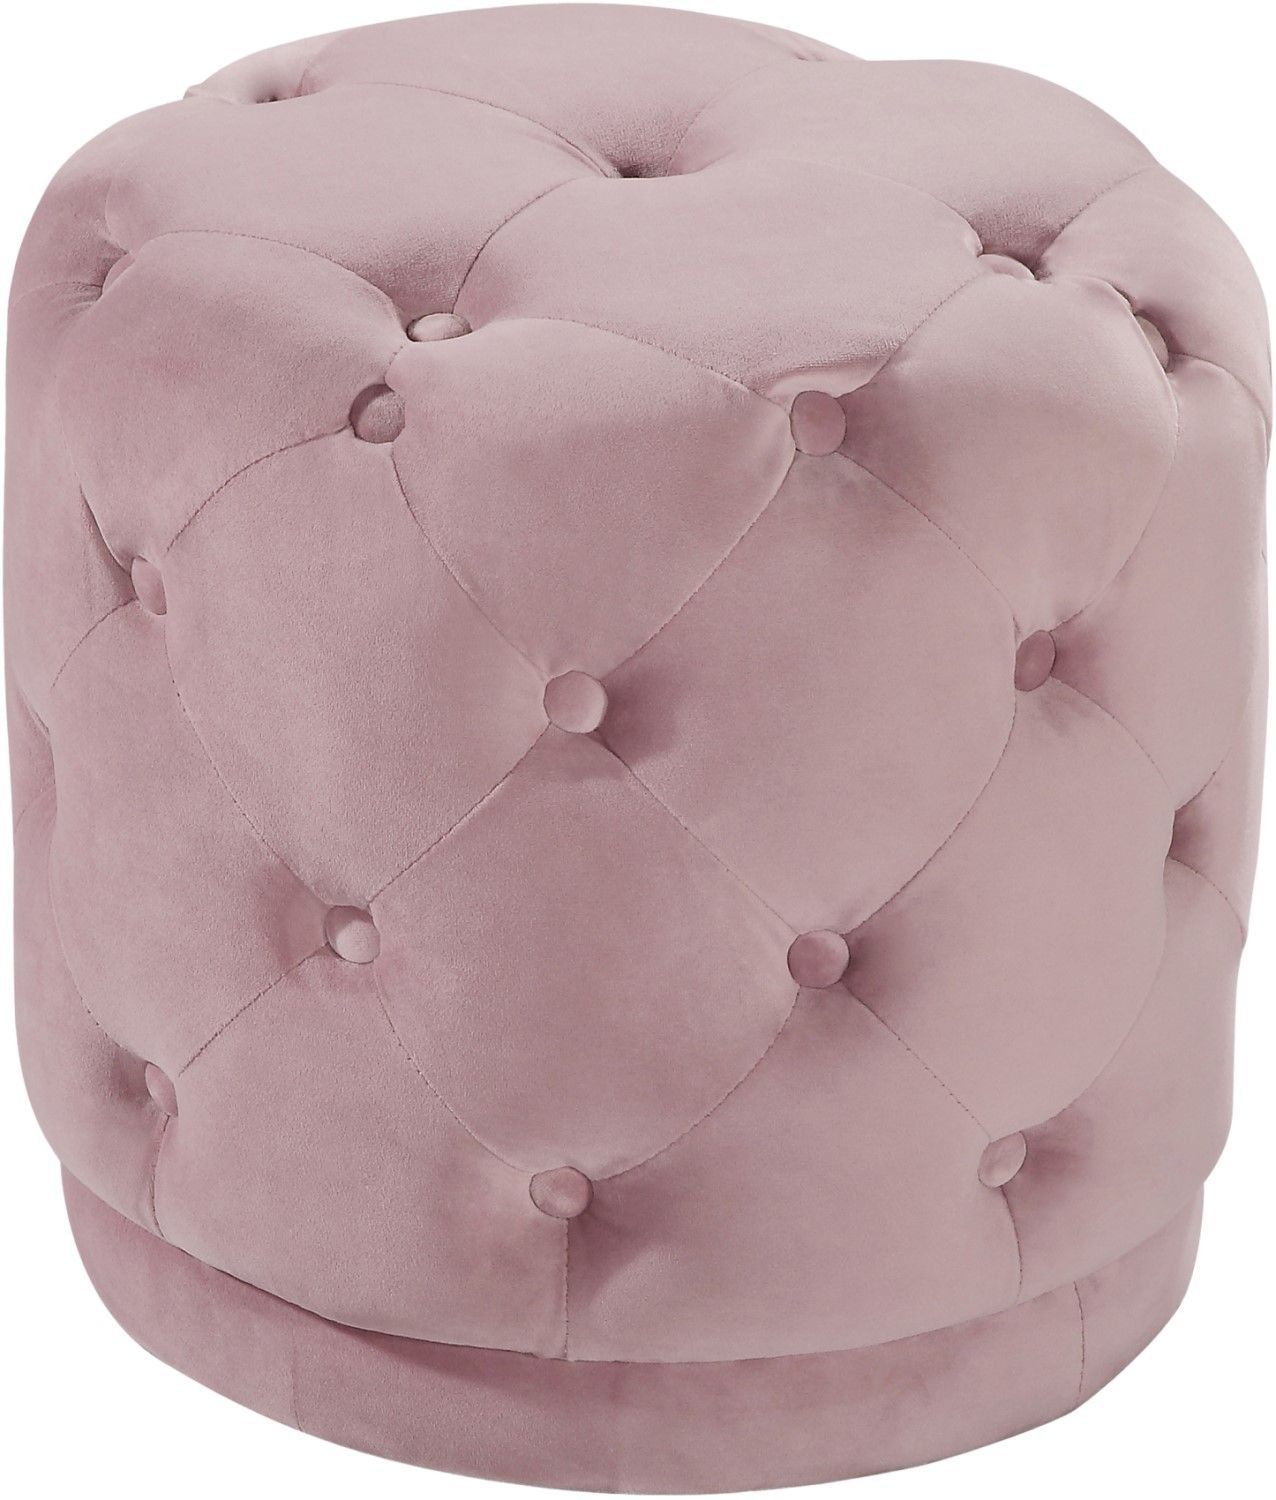 Carlinn Contemporary Deep Button Tufted Ottoman Stool Pouf In Light Pertaining To Glam Light Pink Velvet Tufted Ottomans (Gallery 19 of 20)